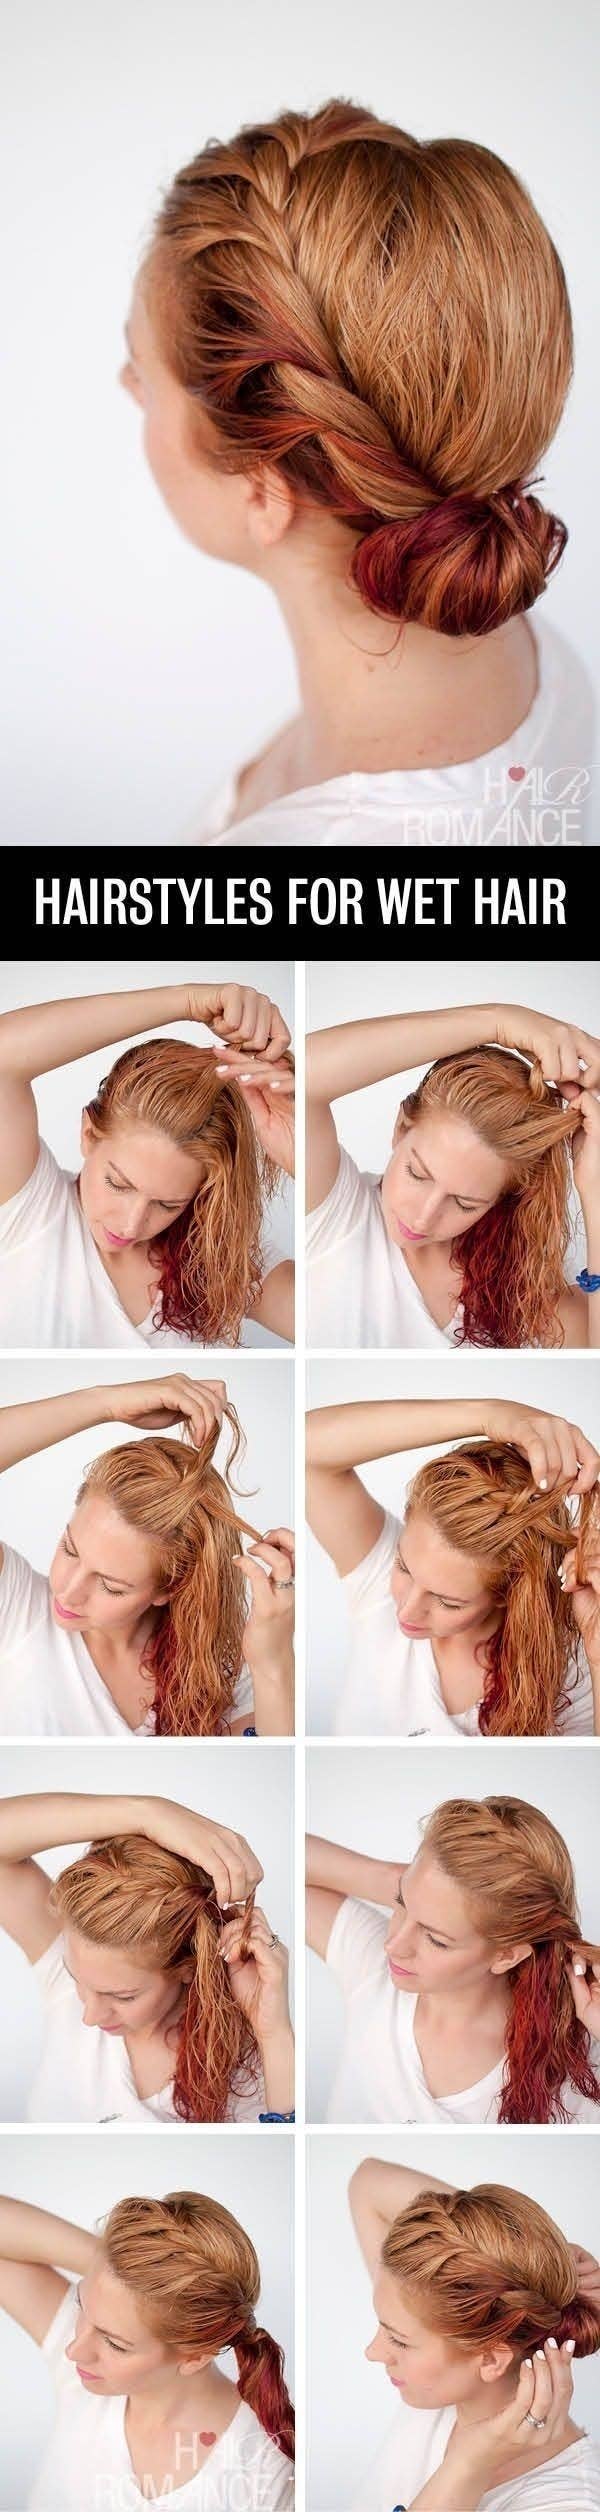 17 Five Minute Hairstyles If You Suck At Doing Your Hair